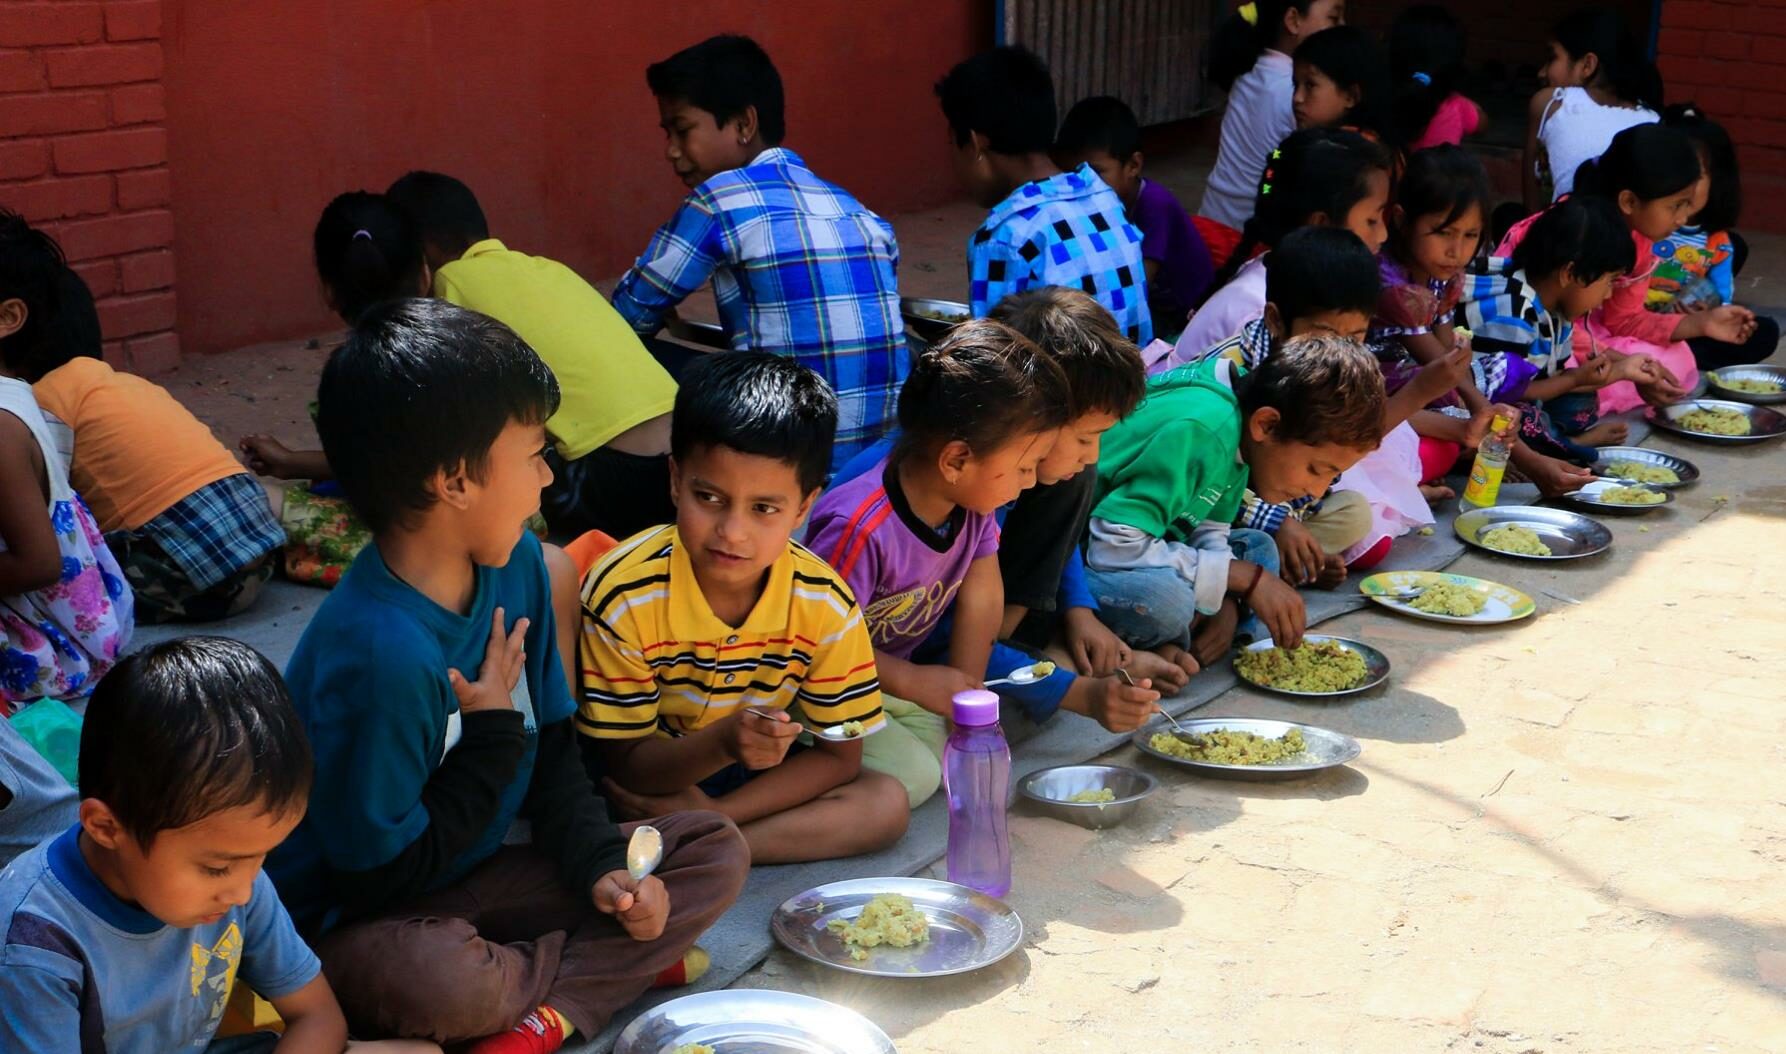 A row of children wearing colorful clothing sit in the shade eating lunch together and chatting.